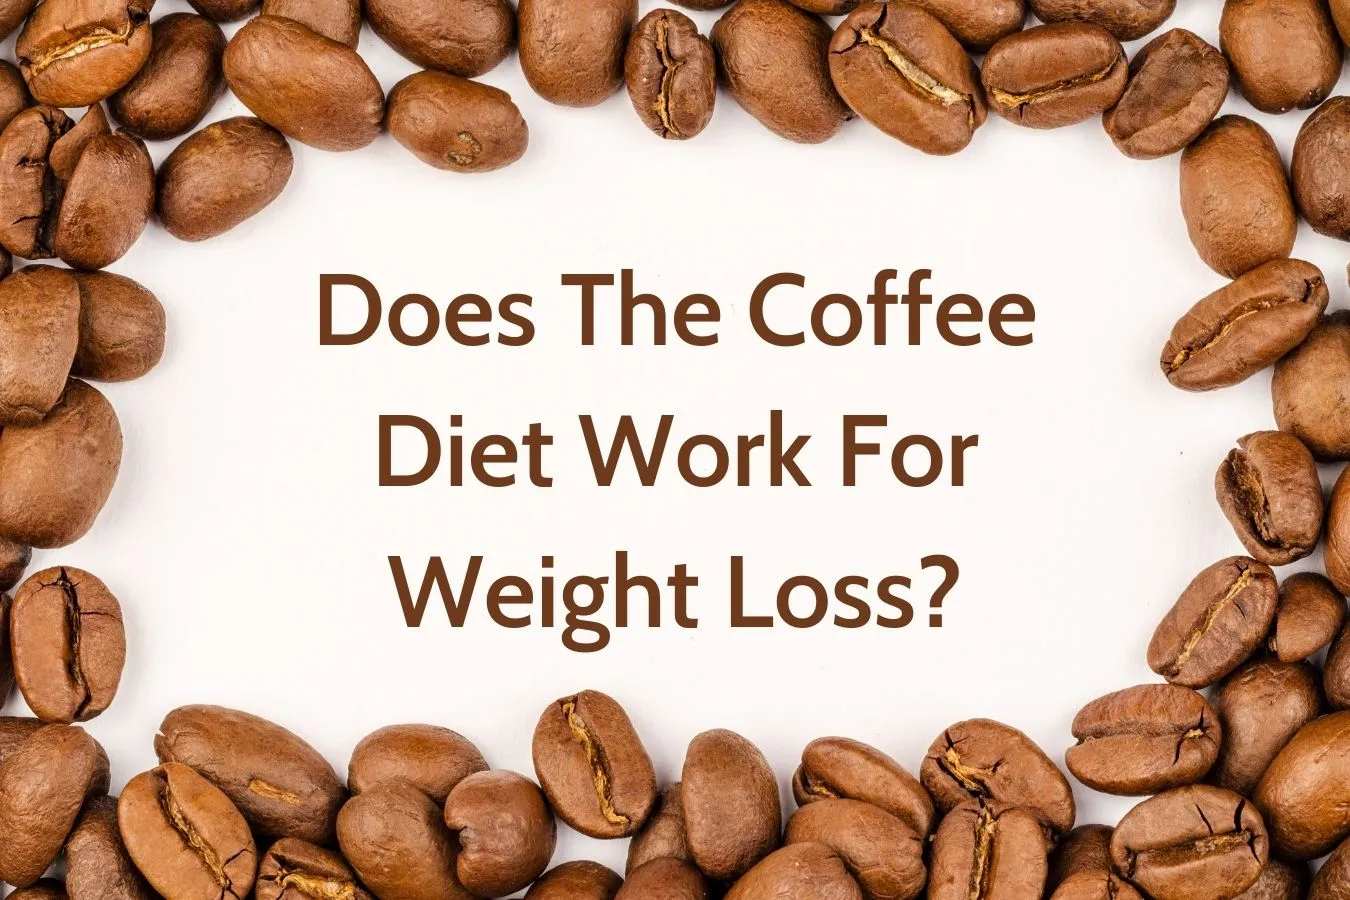 Does The Coffee Diet Work For Weight Loss